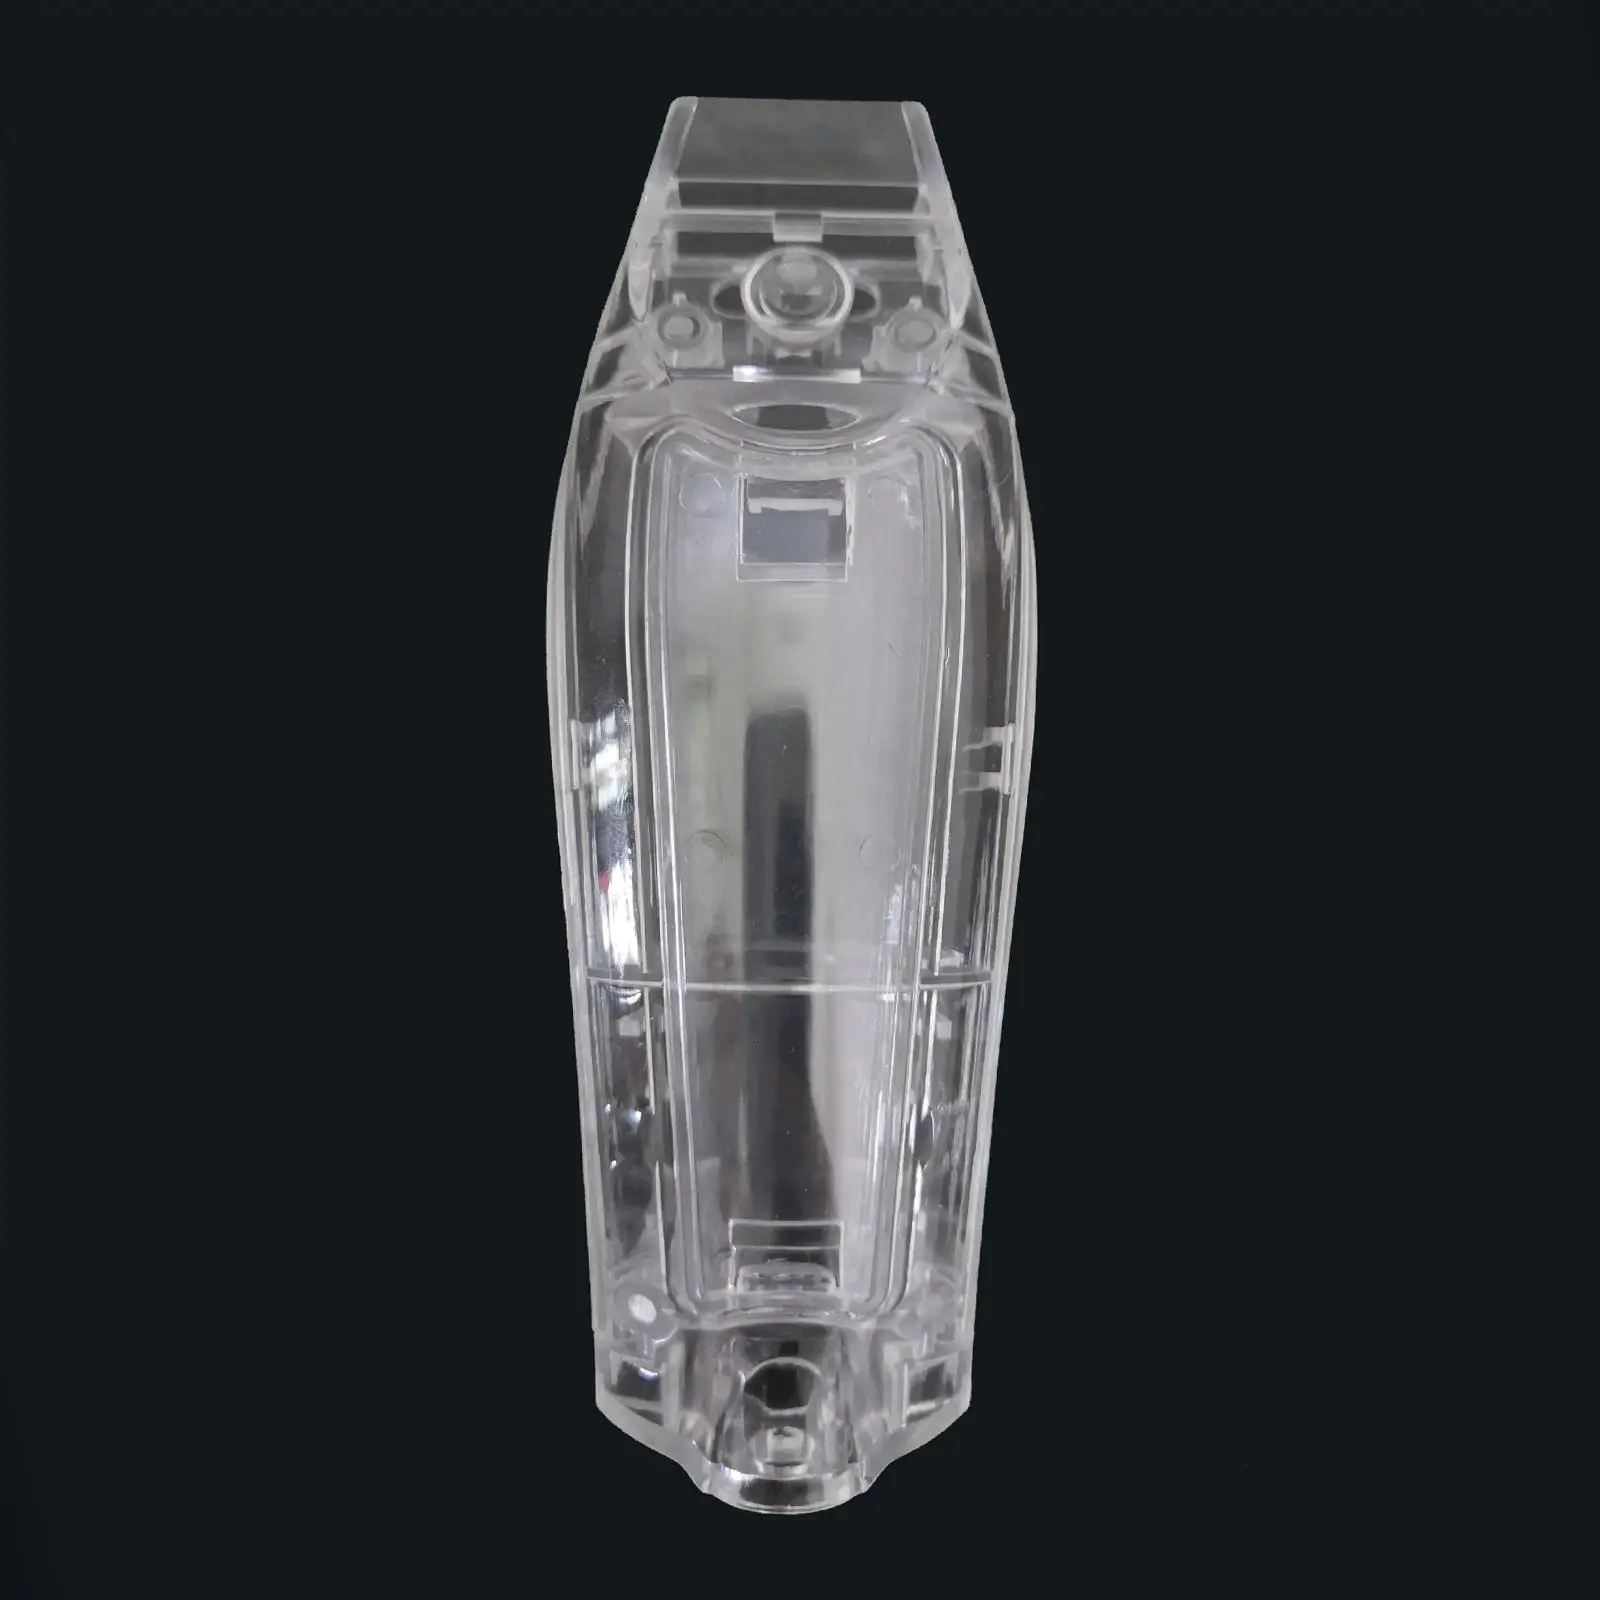 DIY Full Housing Combo, Transparent Protective PC Base Clear Electric Shell for 8081 Barber